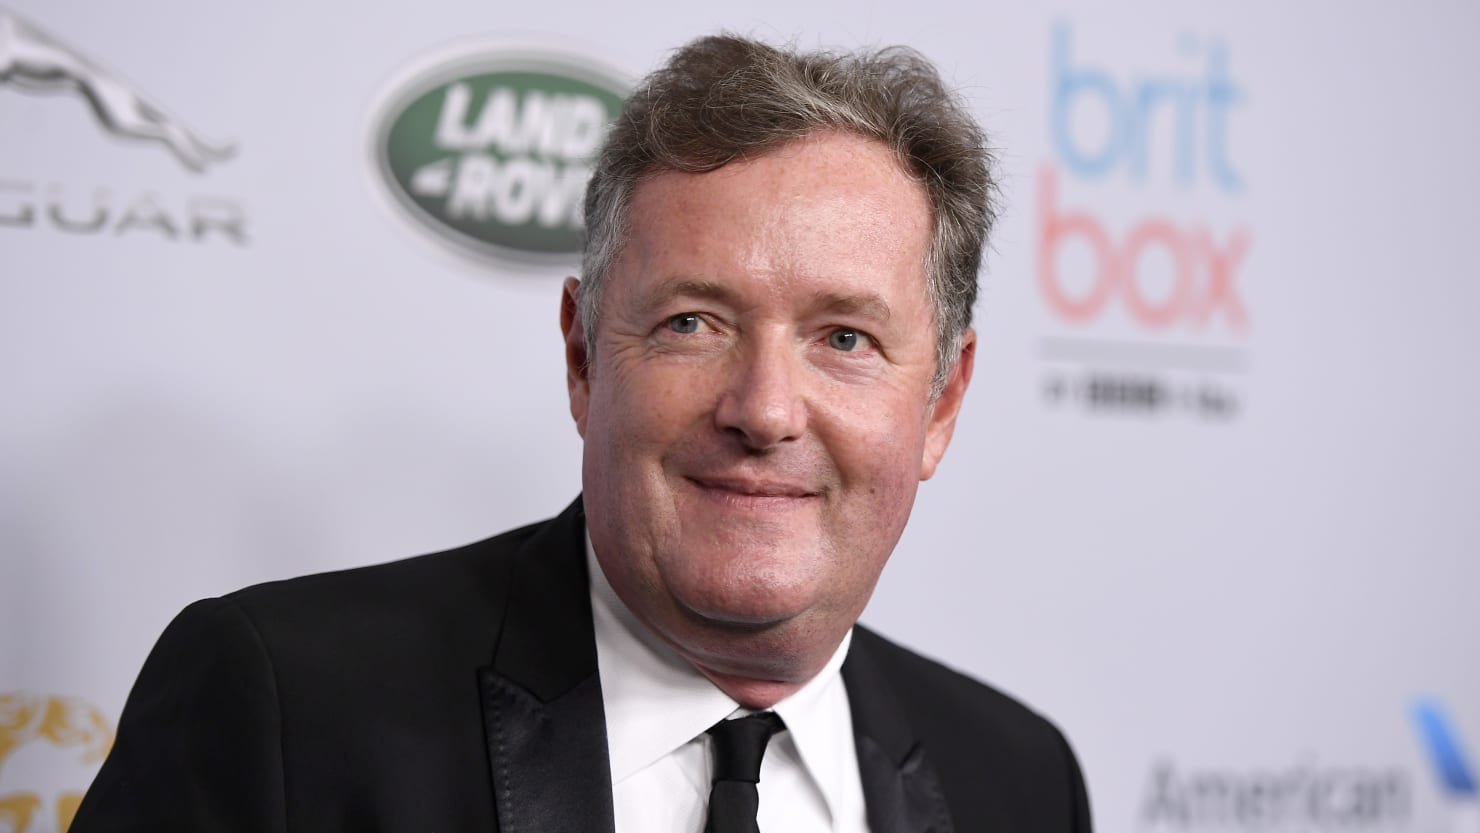 Piers Morgan leaves “Good Morning Britain” after the assault set during his Meghan Markle Hissyfit